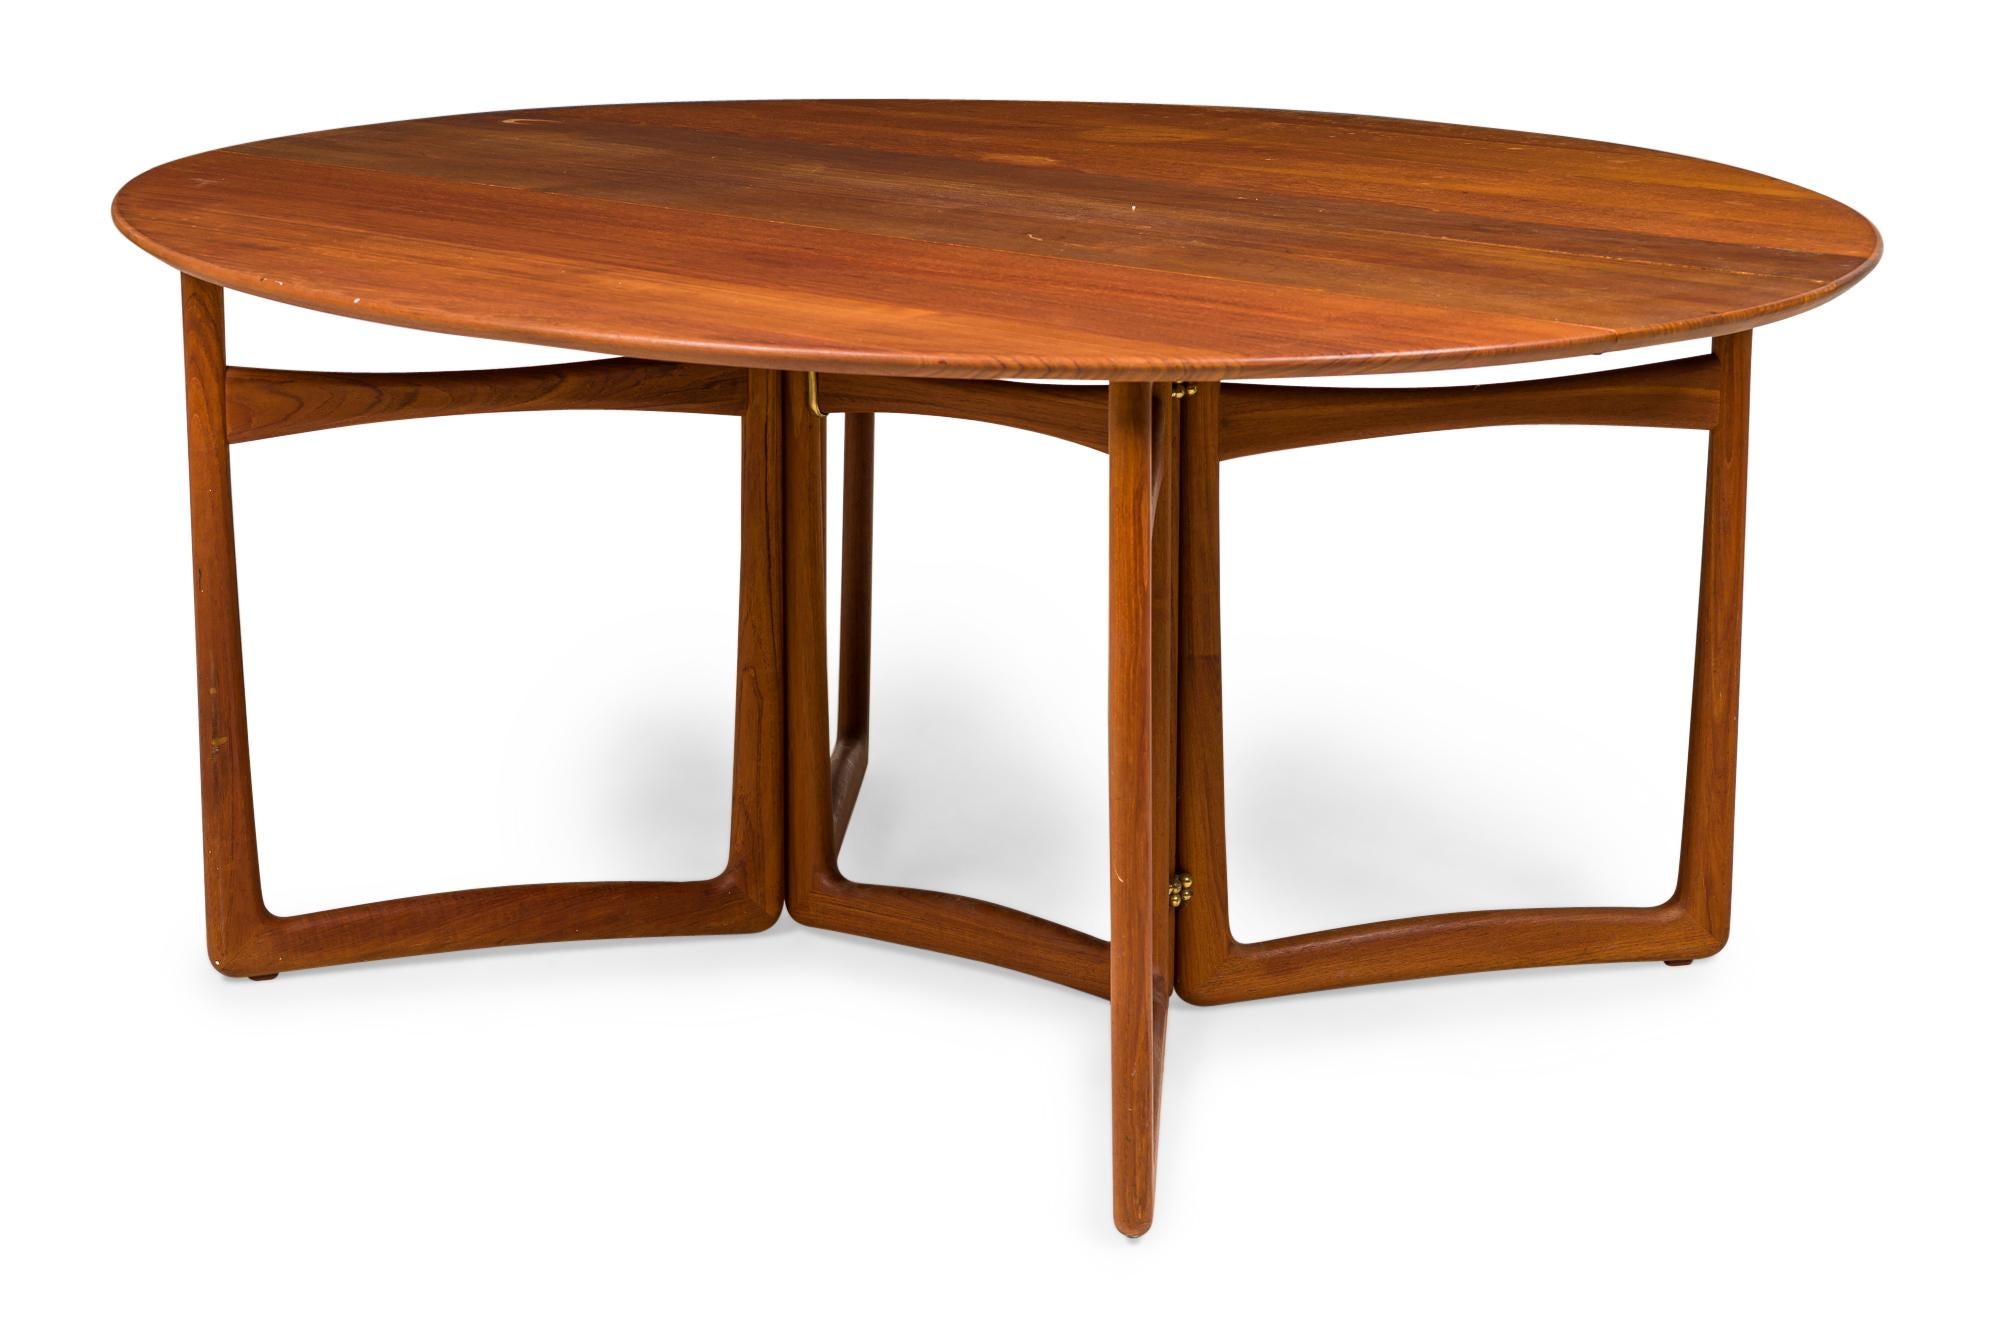 Danish Mid-Century wooden console / dining table with a rectangular console profile when closed, with two demilune drop leaves supported by four gate legs to create a circular dining table when open. (PETER HVIDT)
